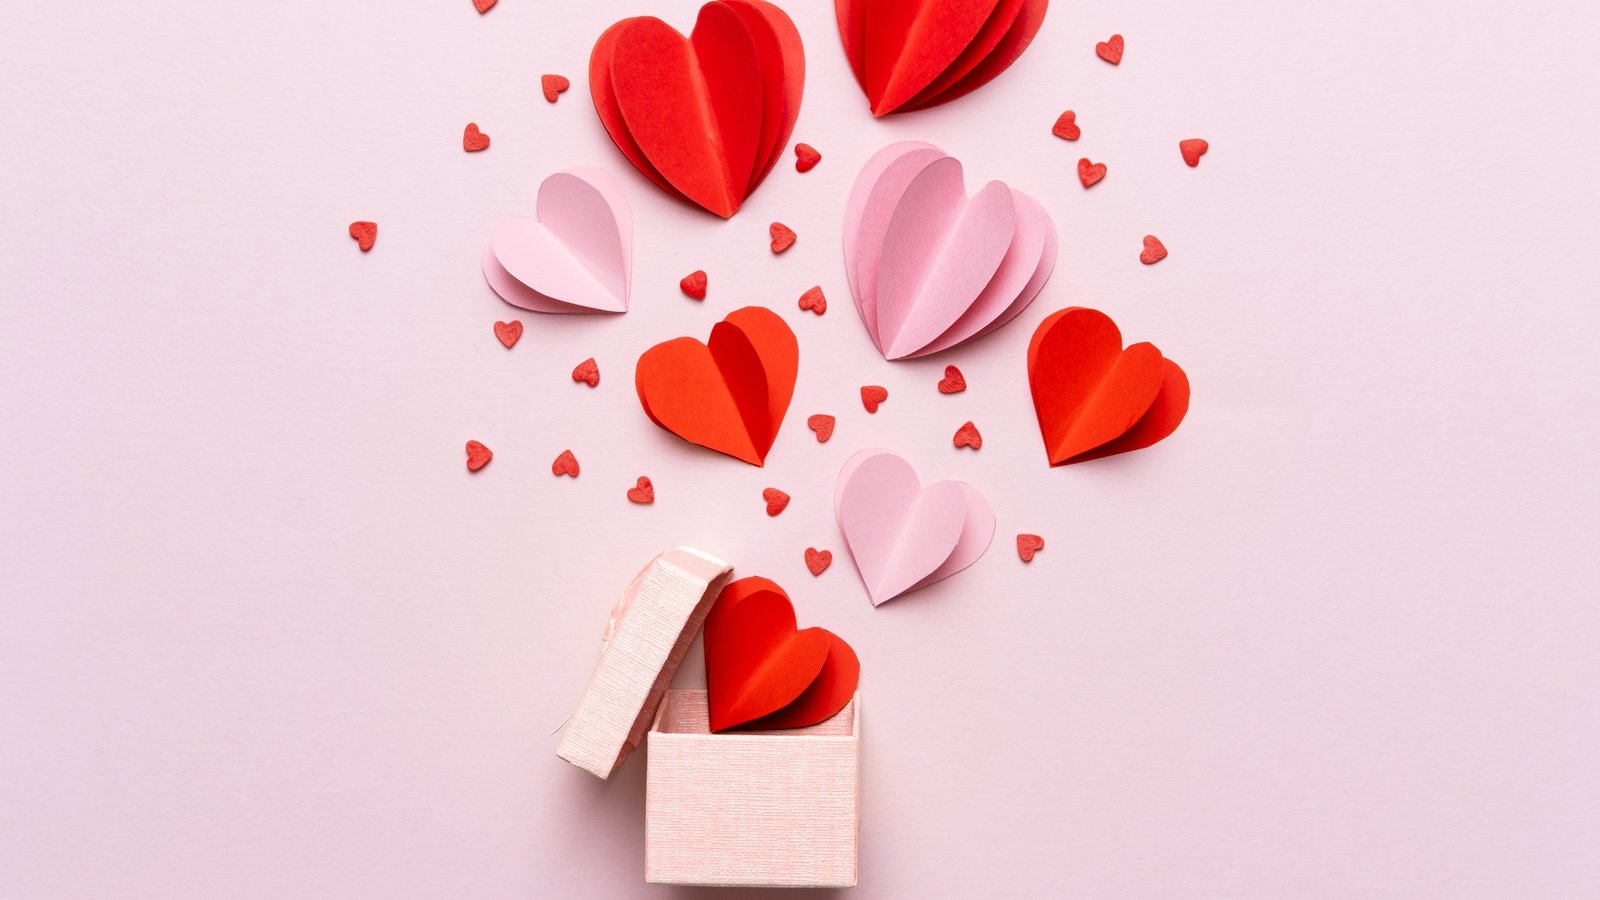 100 Cute Valentine's Day Gifts For Boyfriends That Are Sweet and Romantic -  Hike n Dip  Valentine's day gift baskets, Valentines day gifts for him  boyfriends, Simple valentines gifts